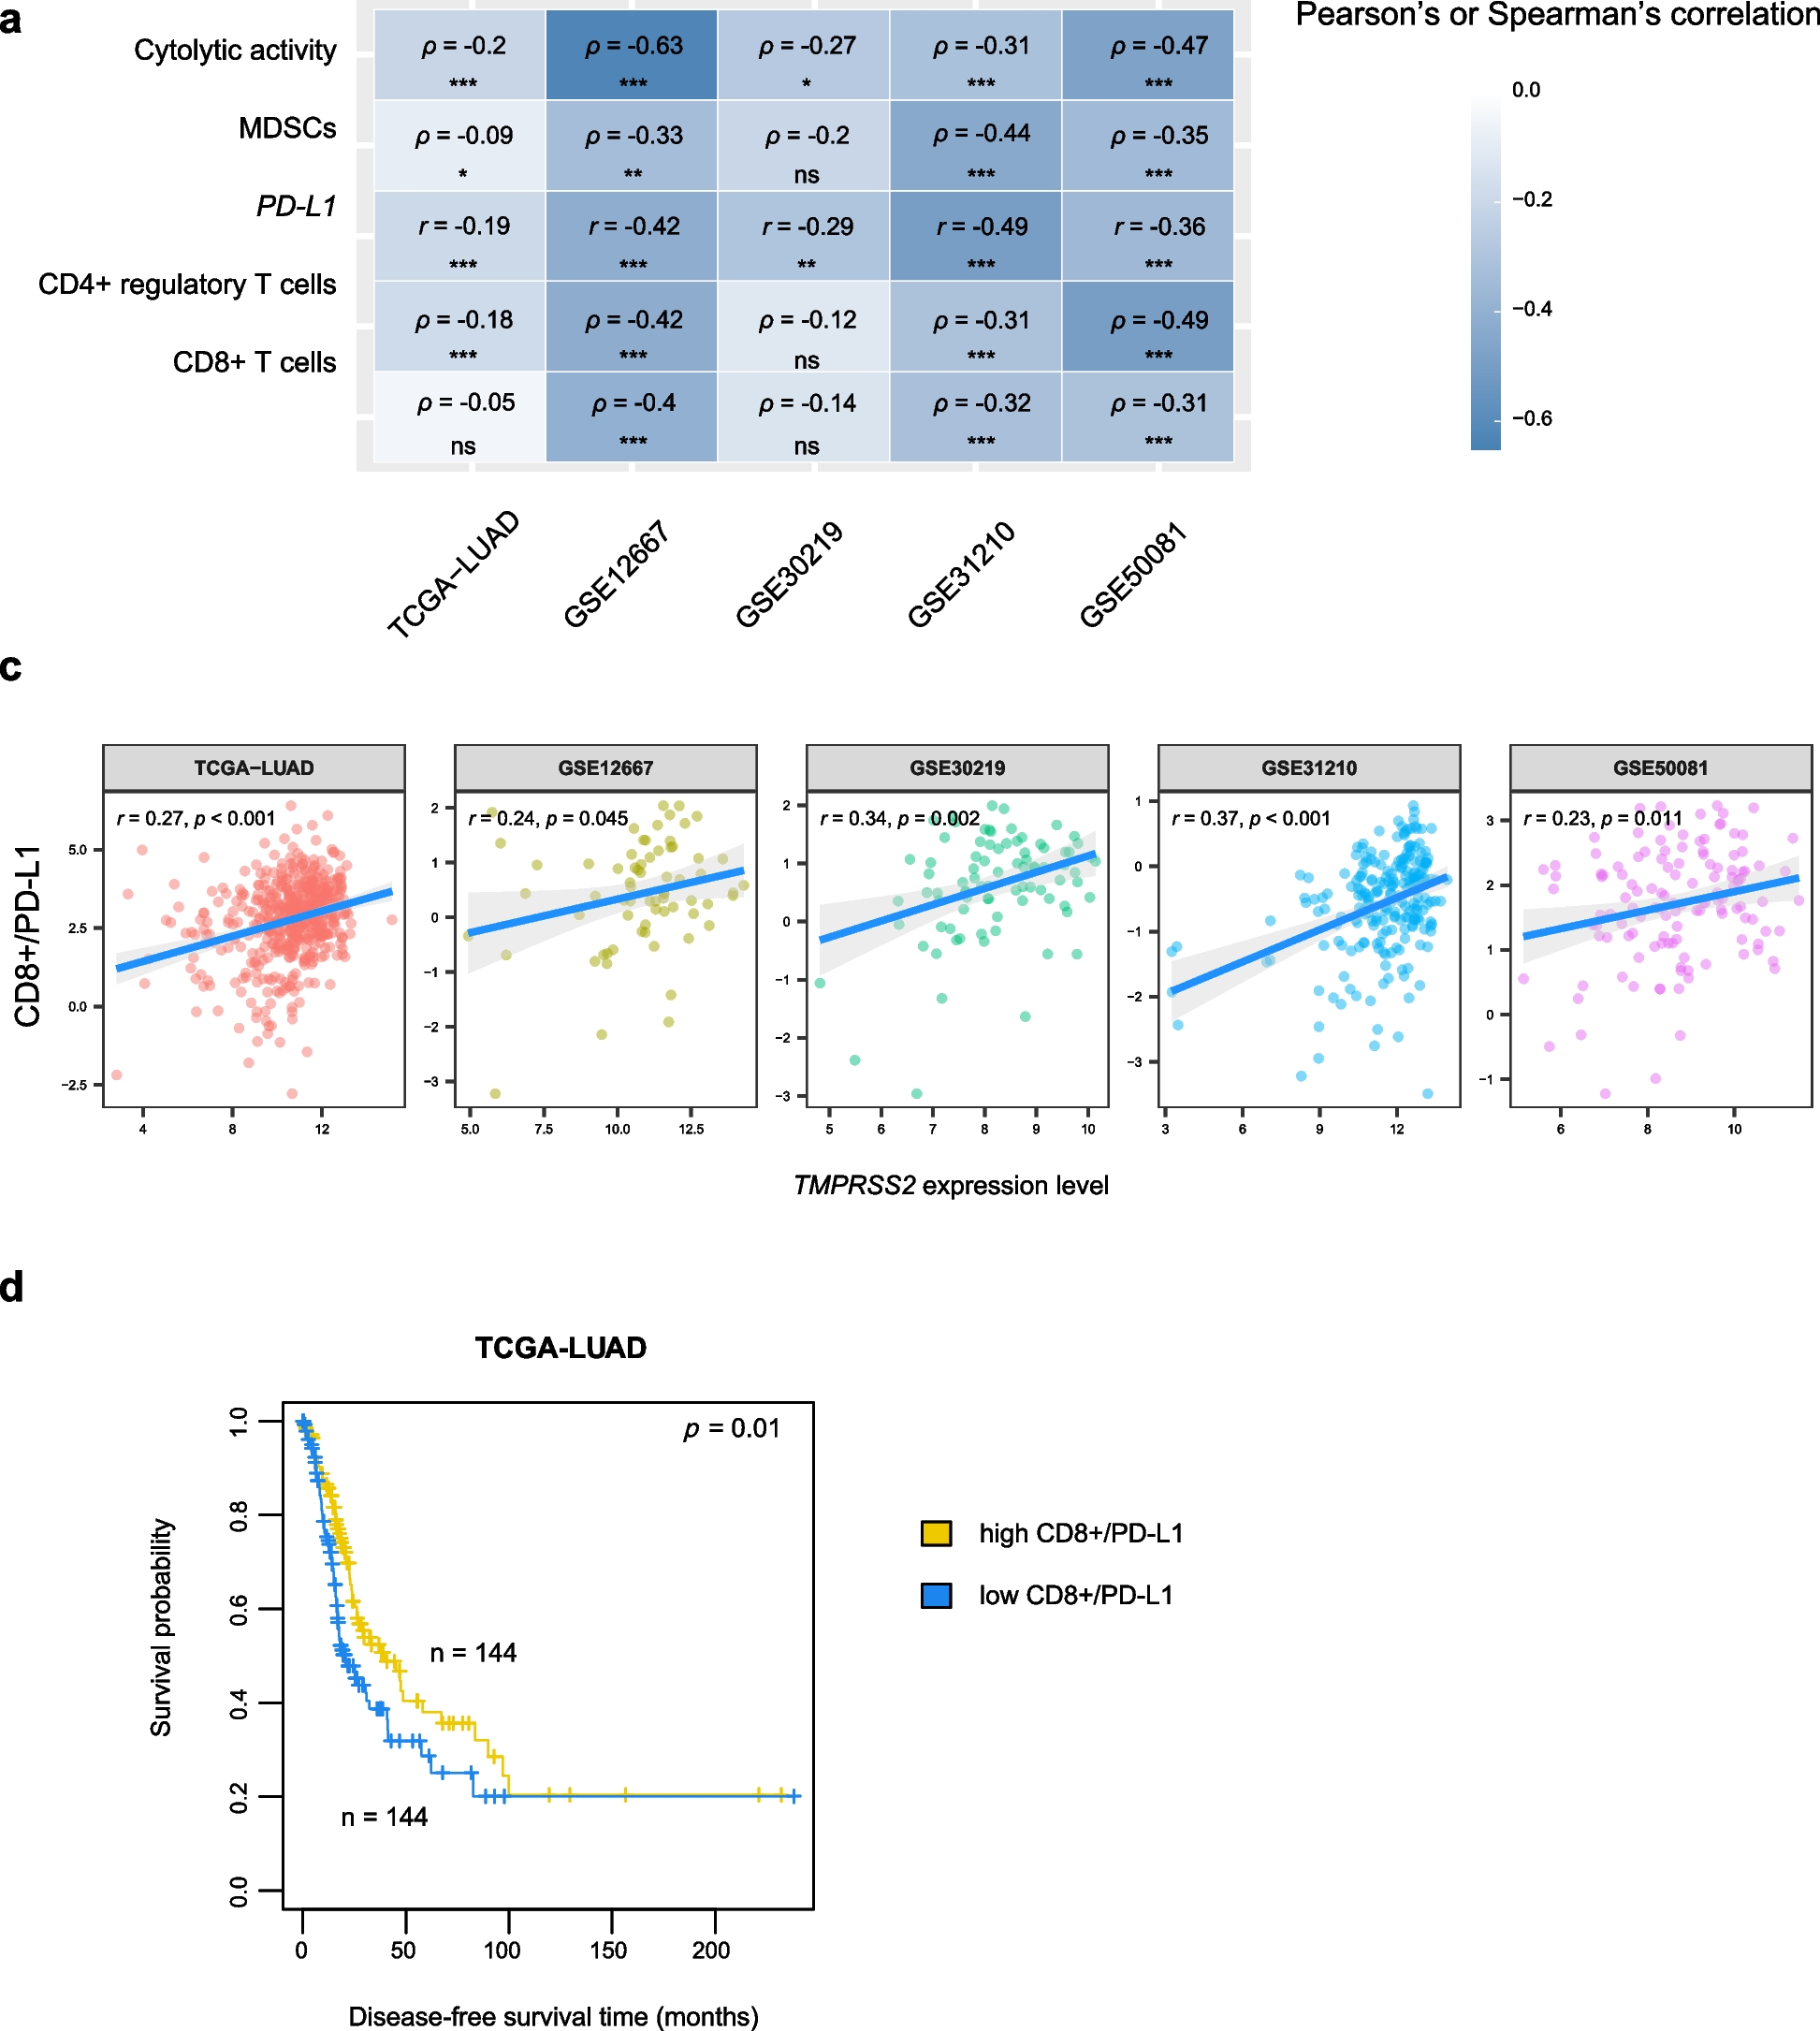 TMPRSS2 is a tumor suppressor and its downregulation promotes antitumor immunity and immunotherapy response in lung adenocarcinoma